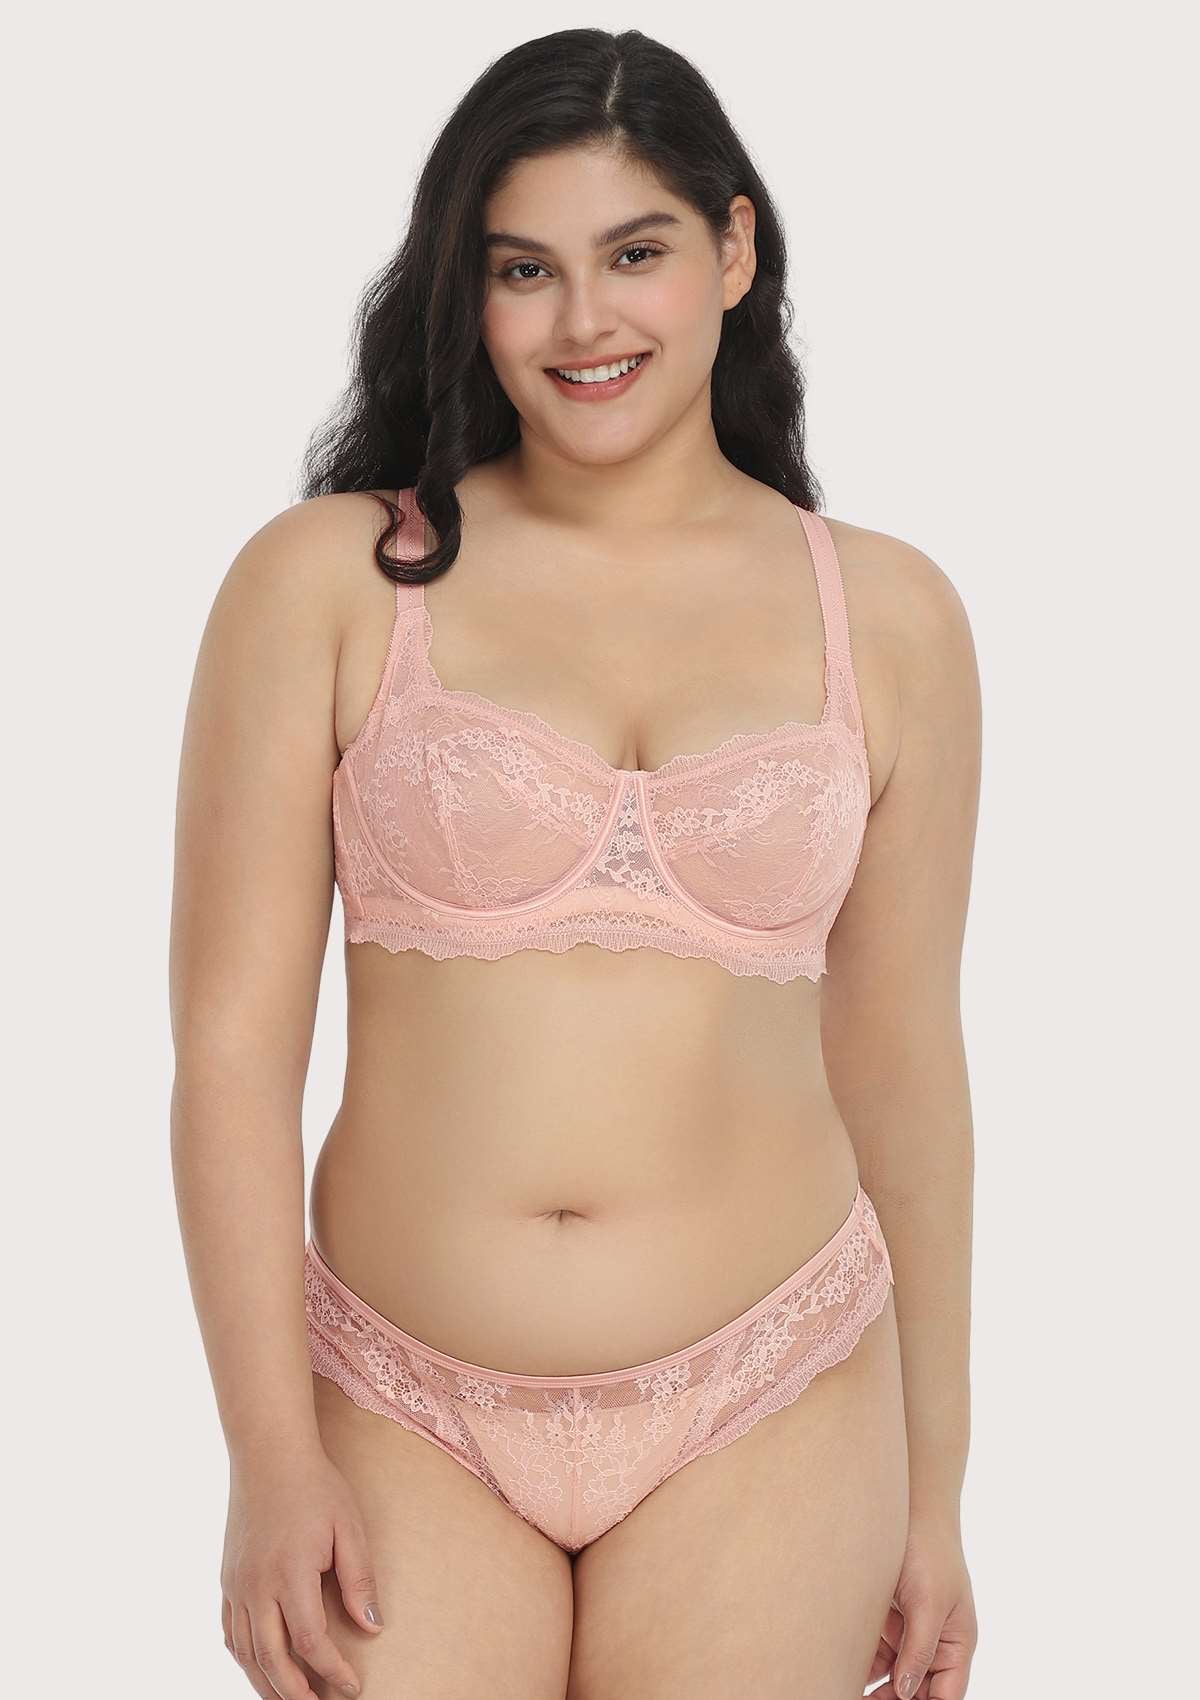 HSIA Floral Lace Unlined Bridal Balconette Delicate Bra Panty Set - Pink / 34 / DDD/F